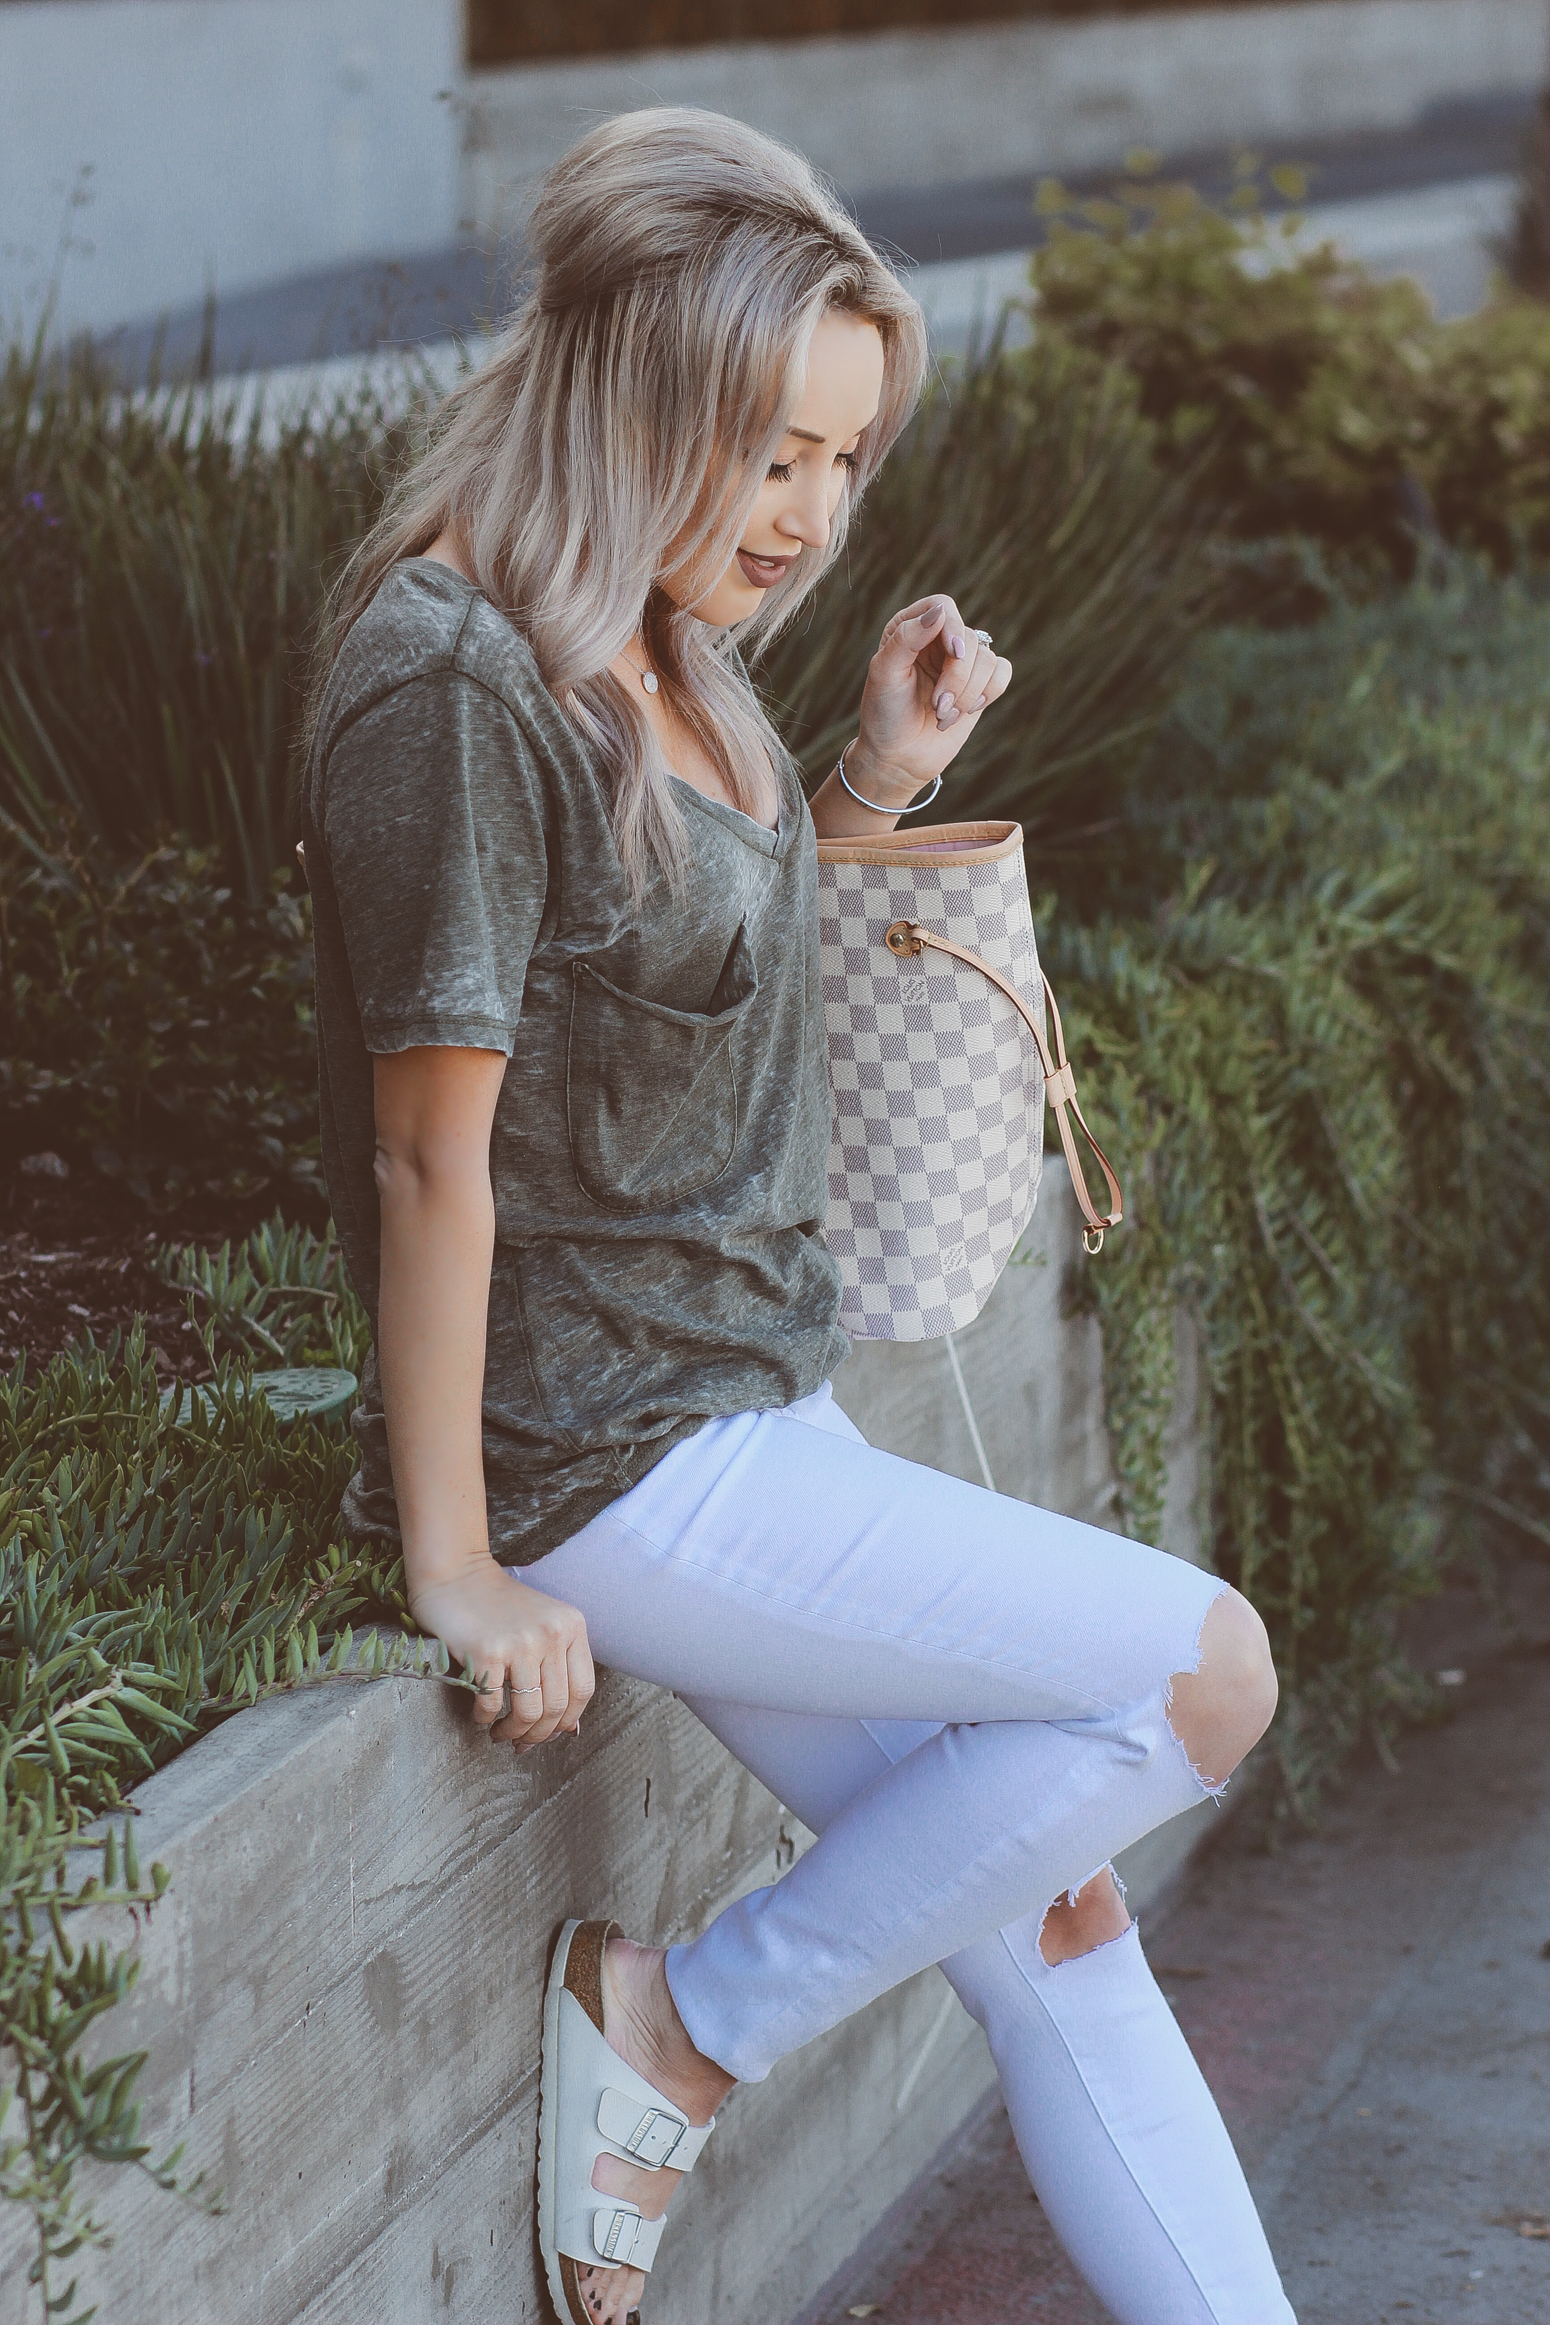 Blondie in the City | Ripped White Jeans & an Olive Green Tee @shopather | White Birkenstocks | Louis Vuitton Bag